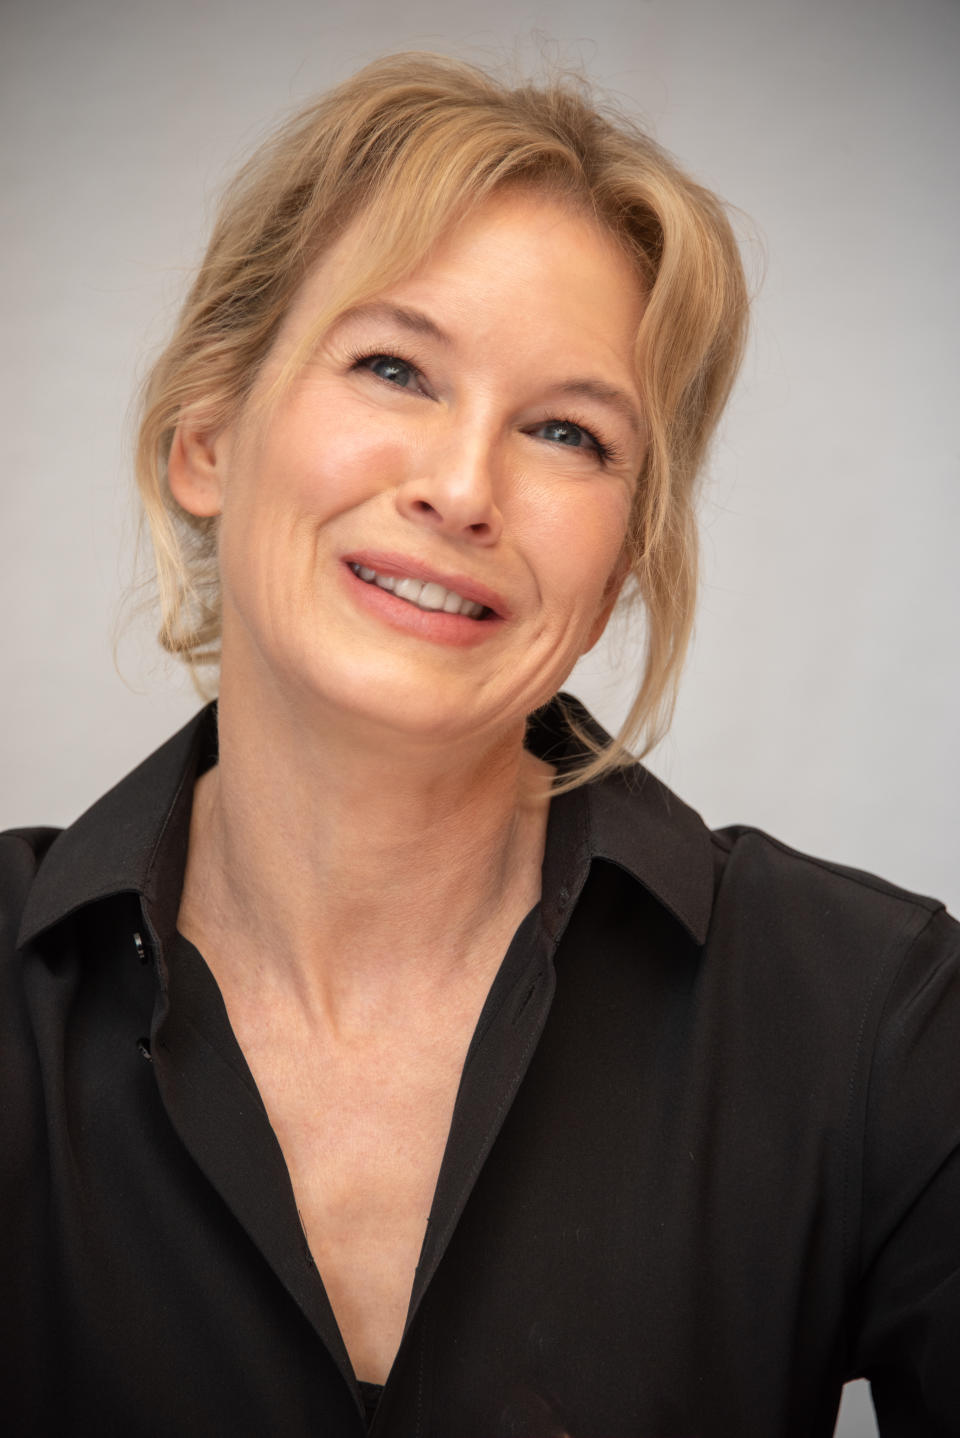 WEST HOLLYWOOD, CALIFORNIA - MAY 17: Renee Zellweger at the "What/If" Press Conference at The London Hotel on May 17, 2019 in West Hollywood, California. (Photo by Vera Anderson/WireImage)